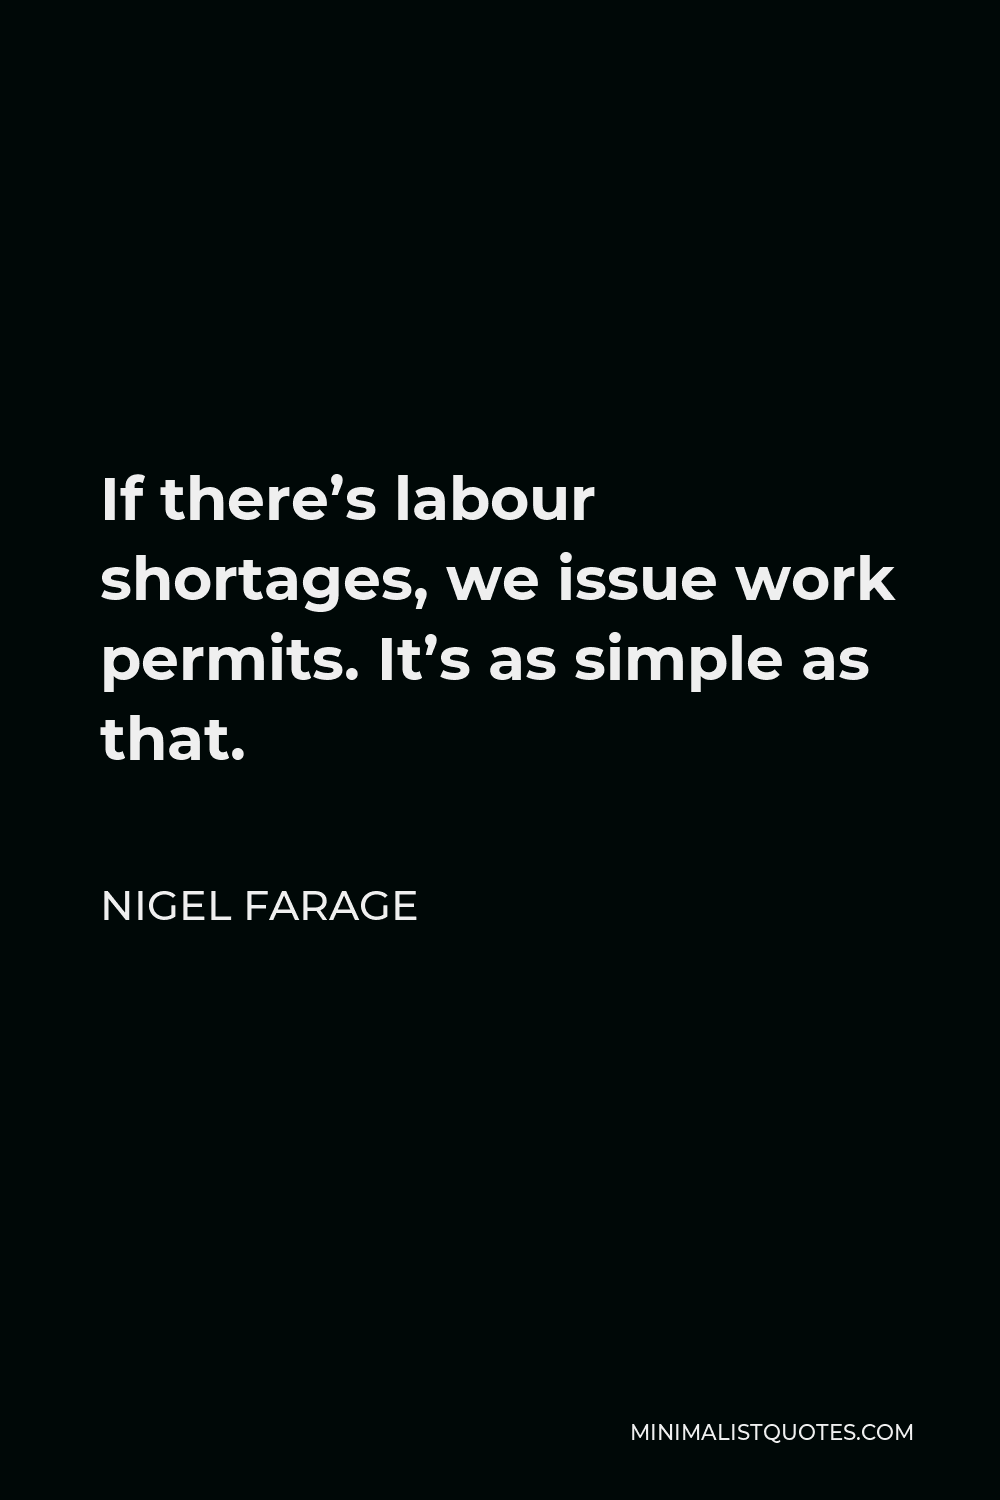 Nigel Farage Quote - If there’s labour shortages, we issue work permits. It’s as simple as that.